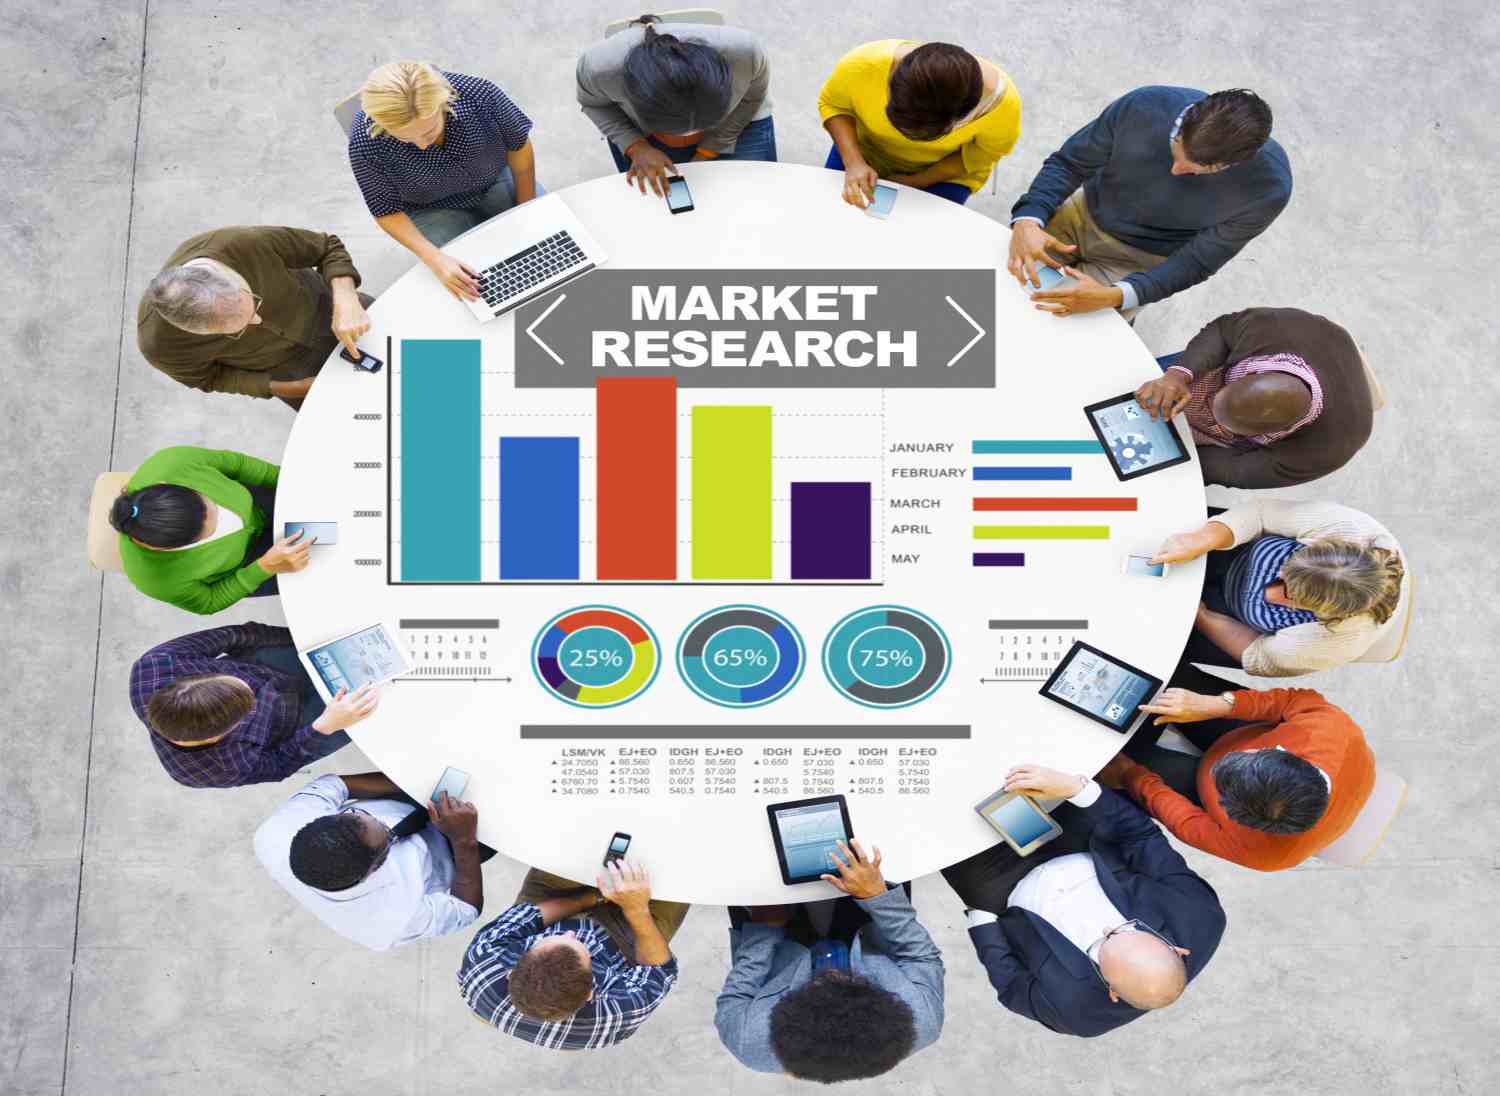 Kiteboarding Equipment Market Research Report by Regional Analysis – North America, Europe, Asia Pacific, Latin America, Middle East & Africa 2018 to 2027 – Crypto Daily